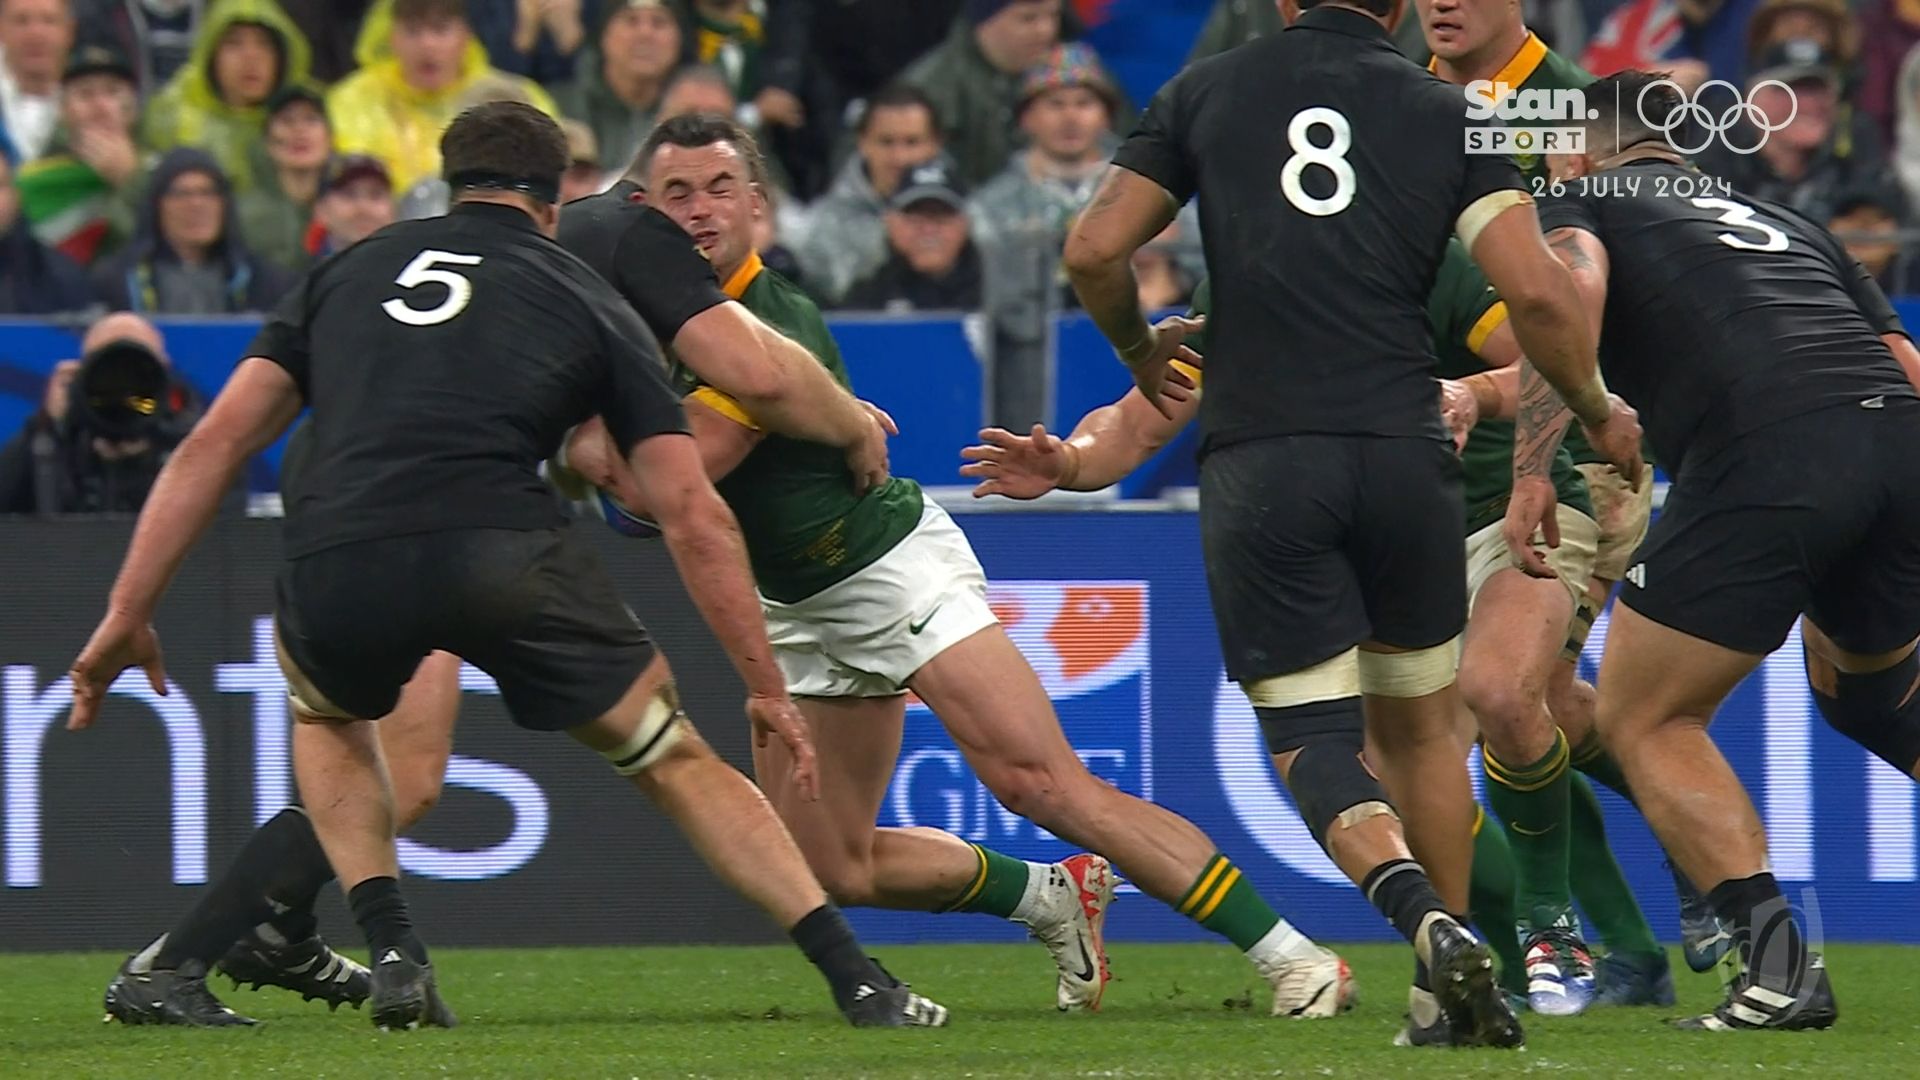 Heartbroken All Blacks captain Sam Cane slapped with ban for high tackle in Rugby World Cup final